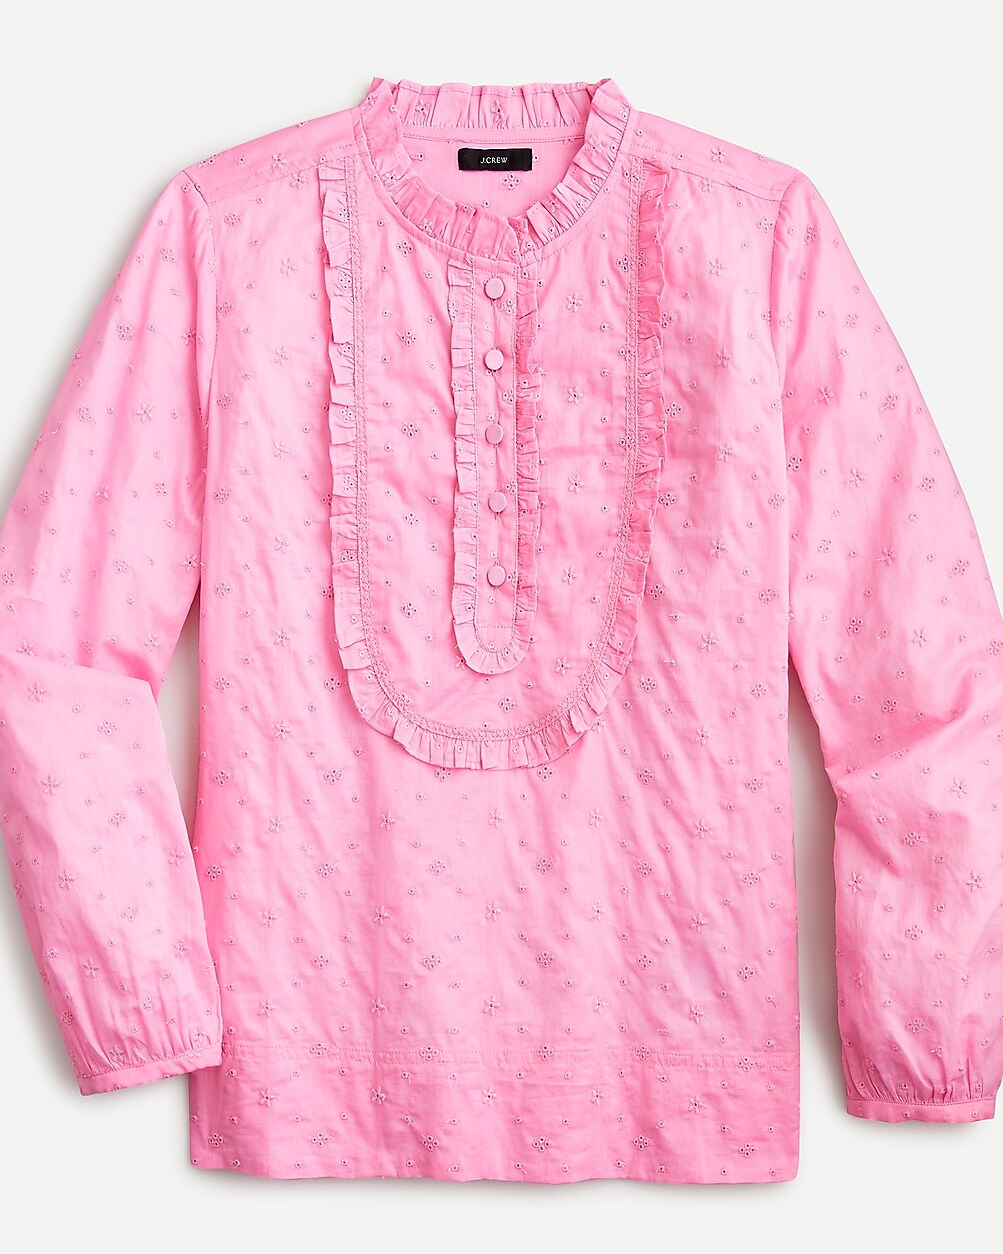 Long-sleeve Ruffle Shirt In Floral Eyelet For Women